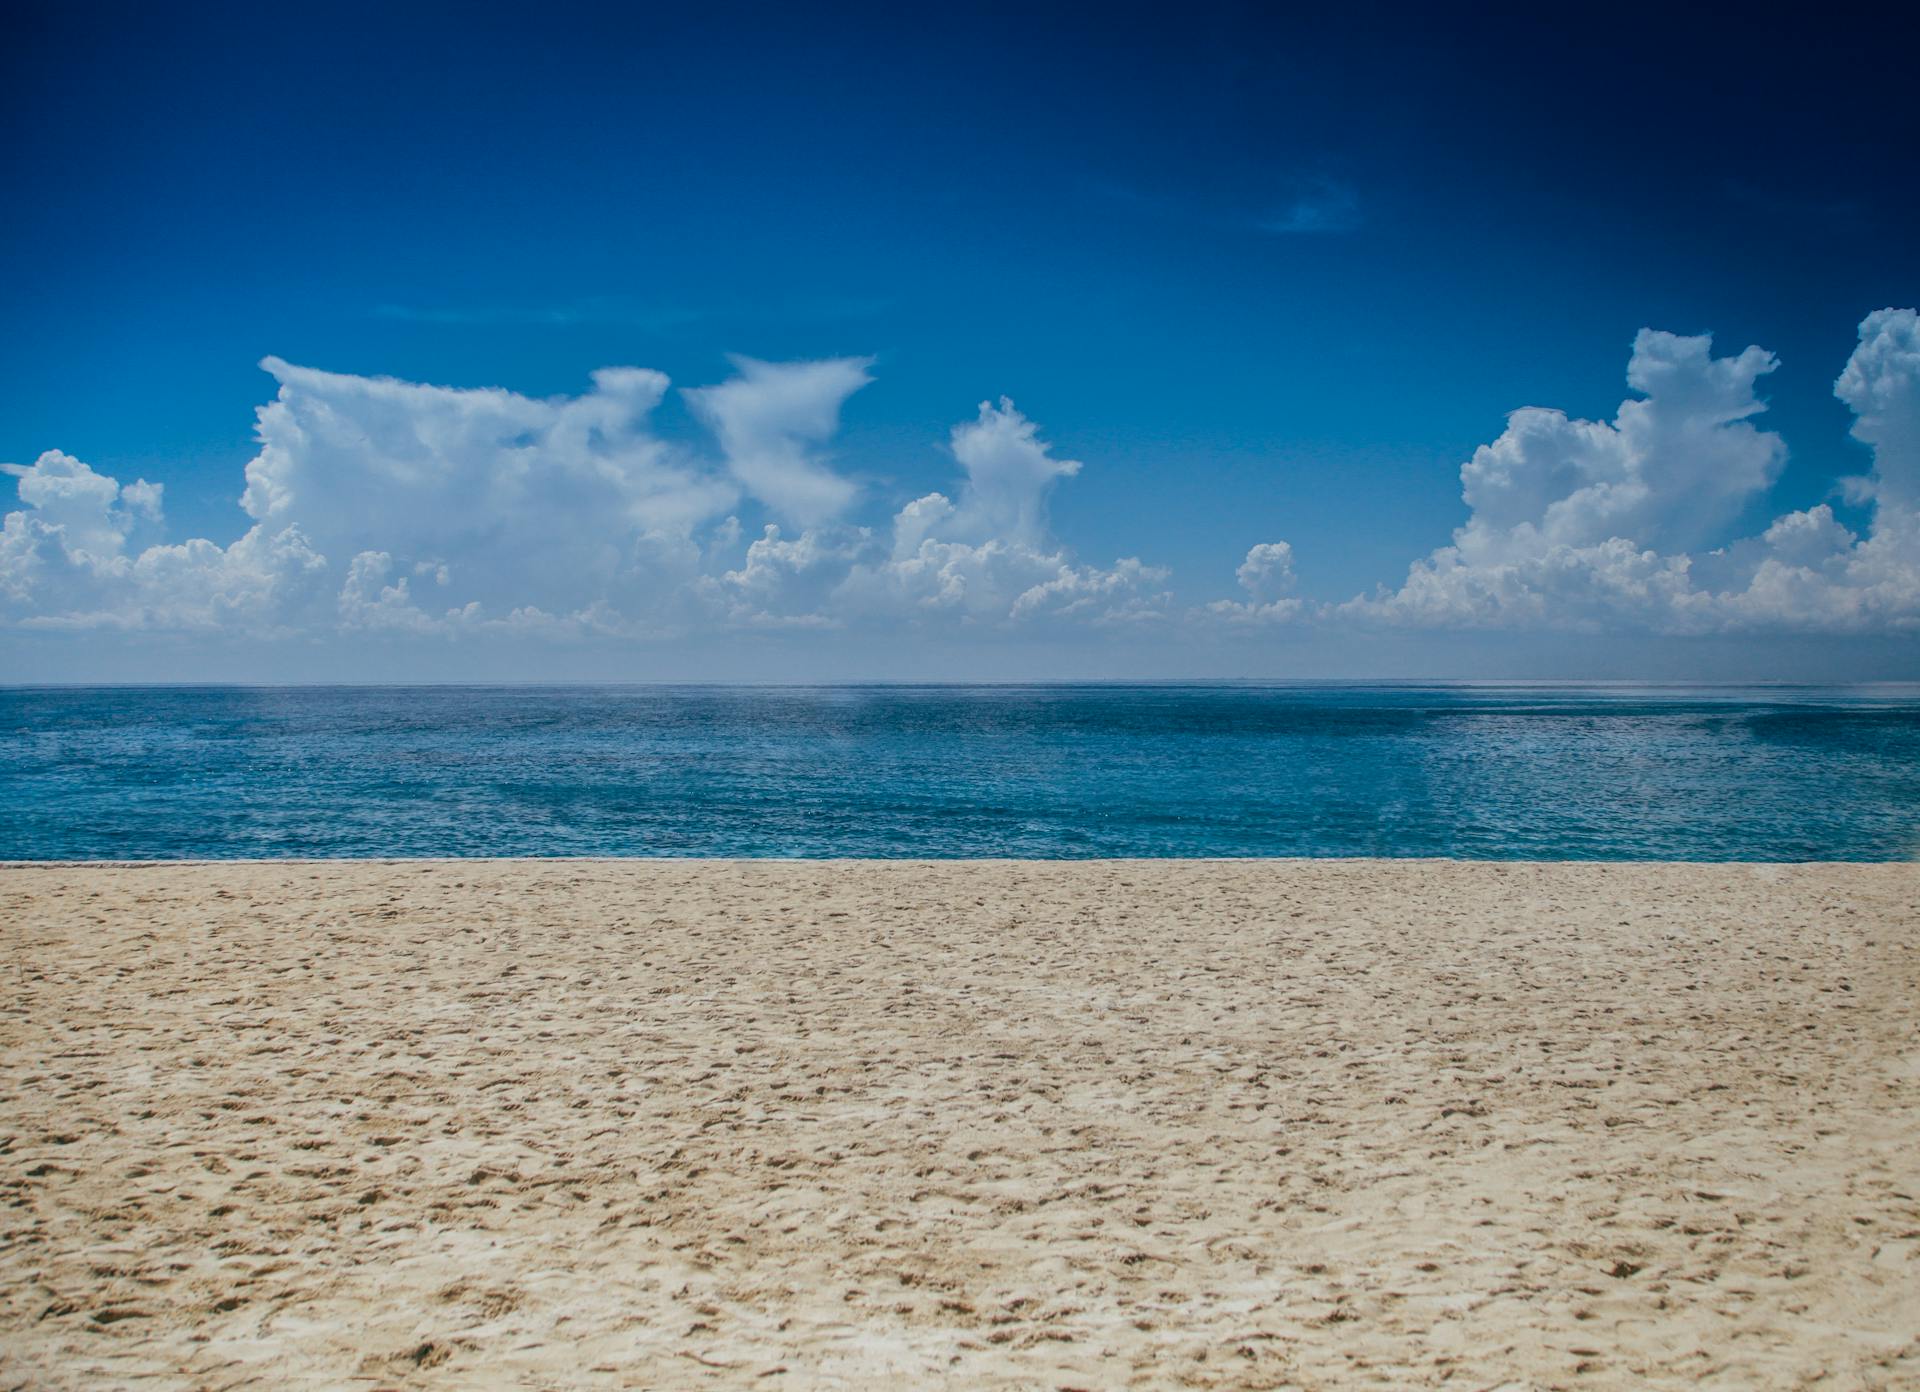 Image of a beach during the day | Source: Pexels